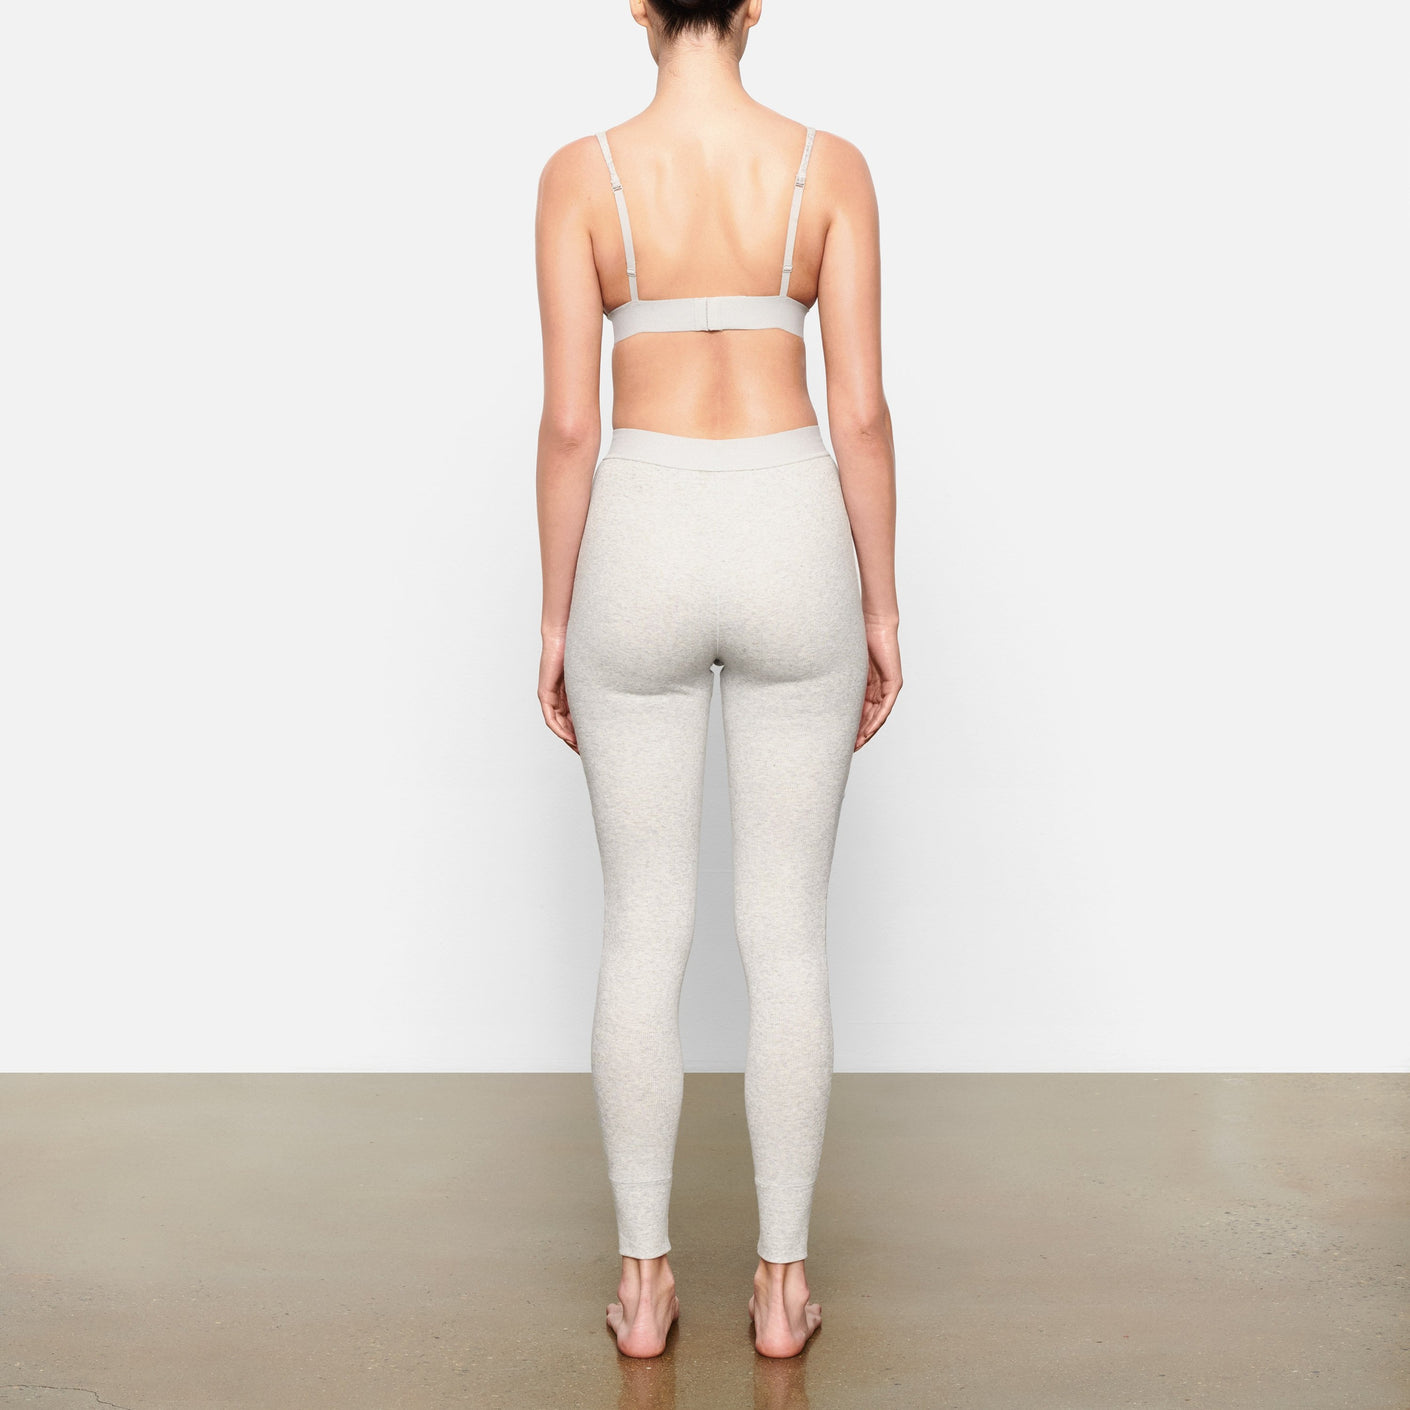 SKIMS Cotton Ribbed Legging Size XS - $30 (44% Off Retail) - From